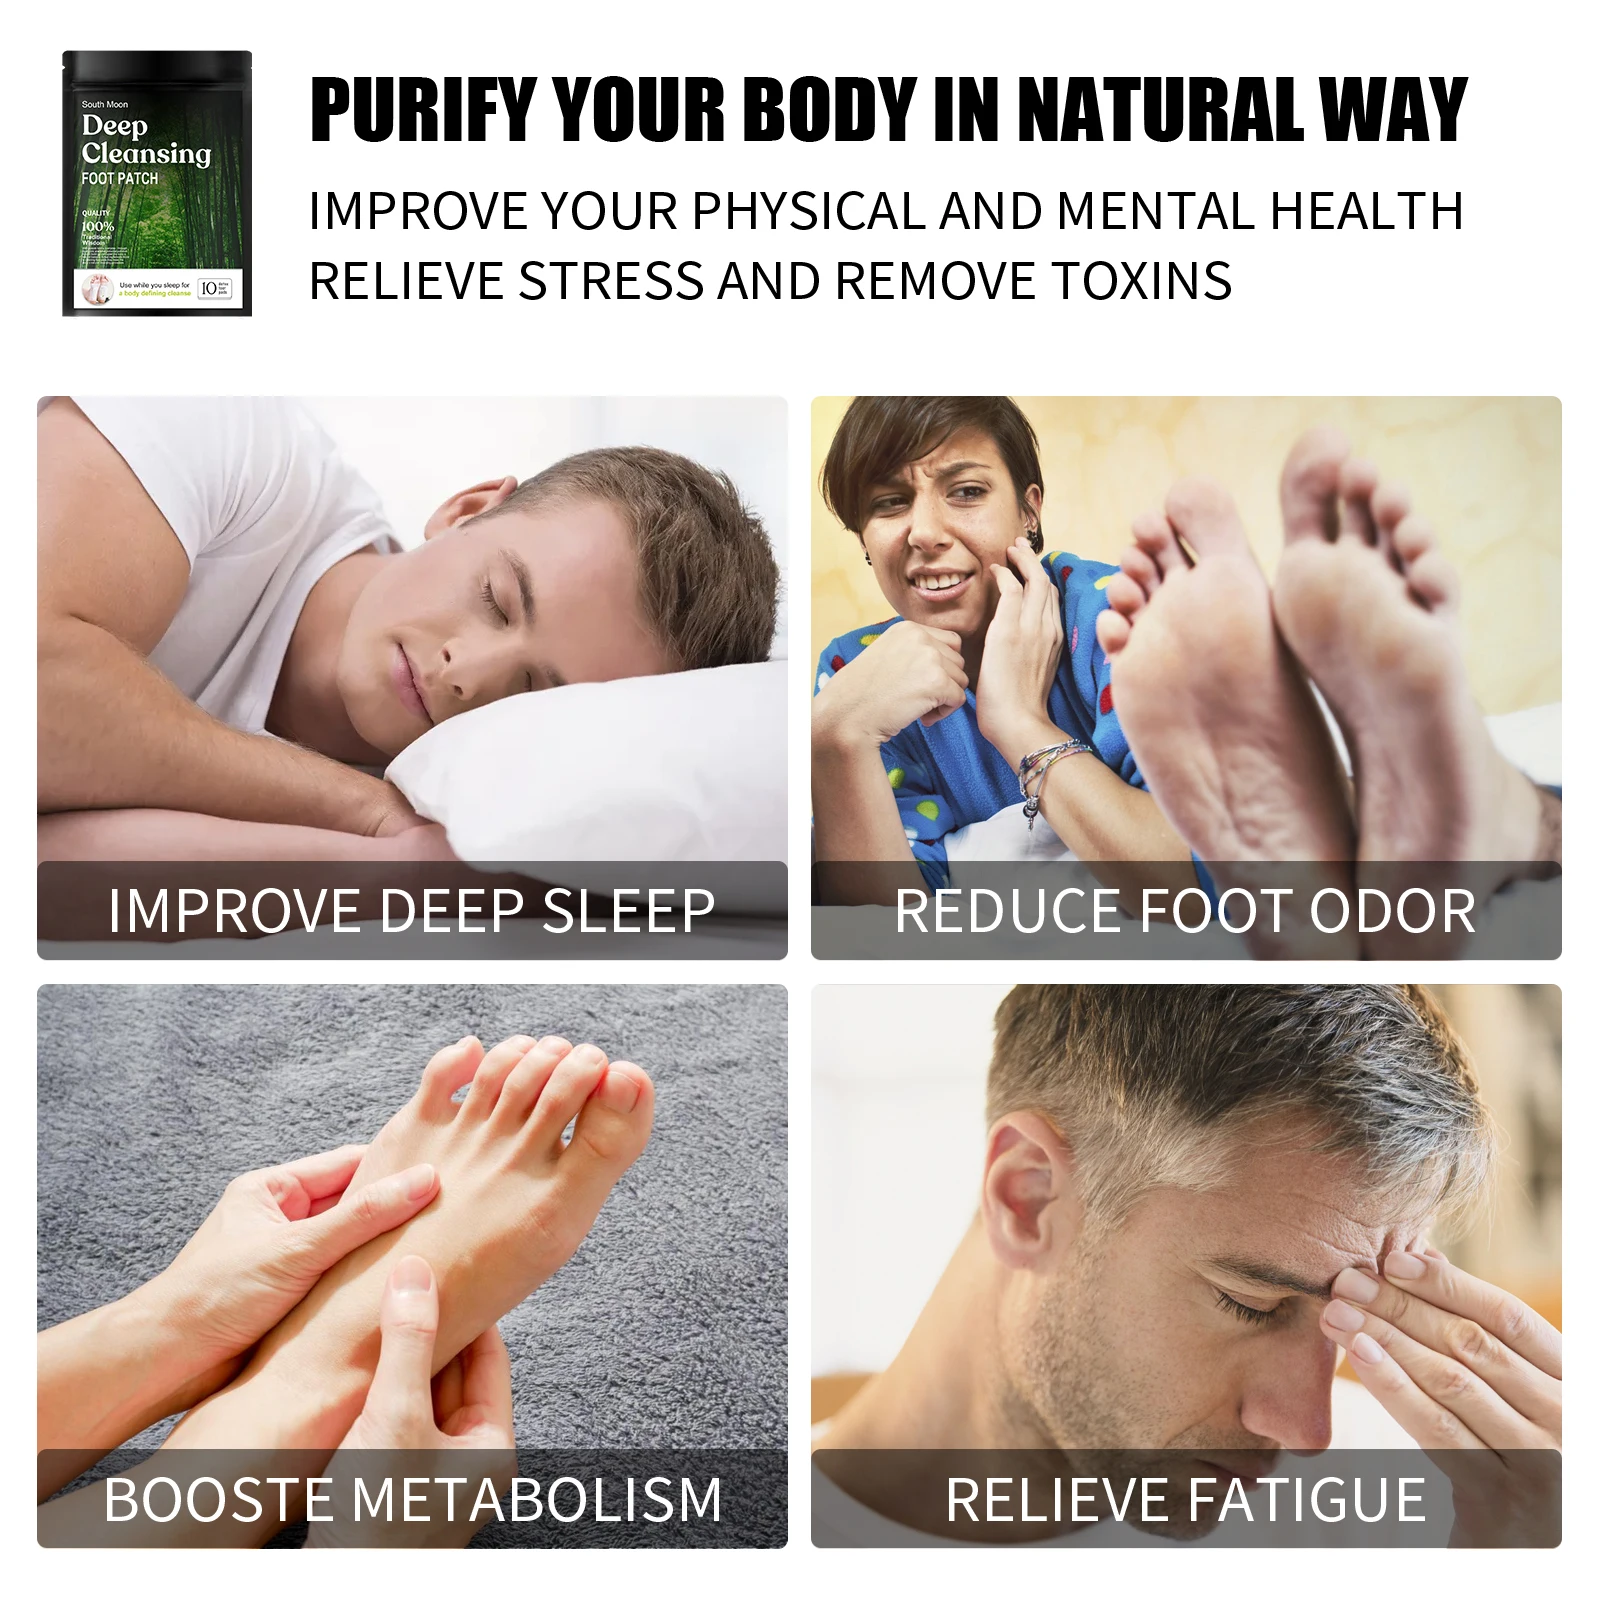 Are clean sleep. Deep Cleaning foot Patch. Natural Wormwood body Cleansing foot Pad инструкция. Remove stress.